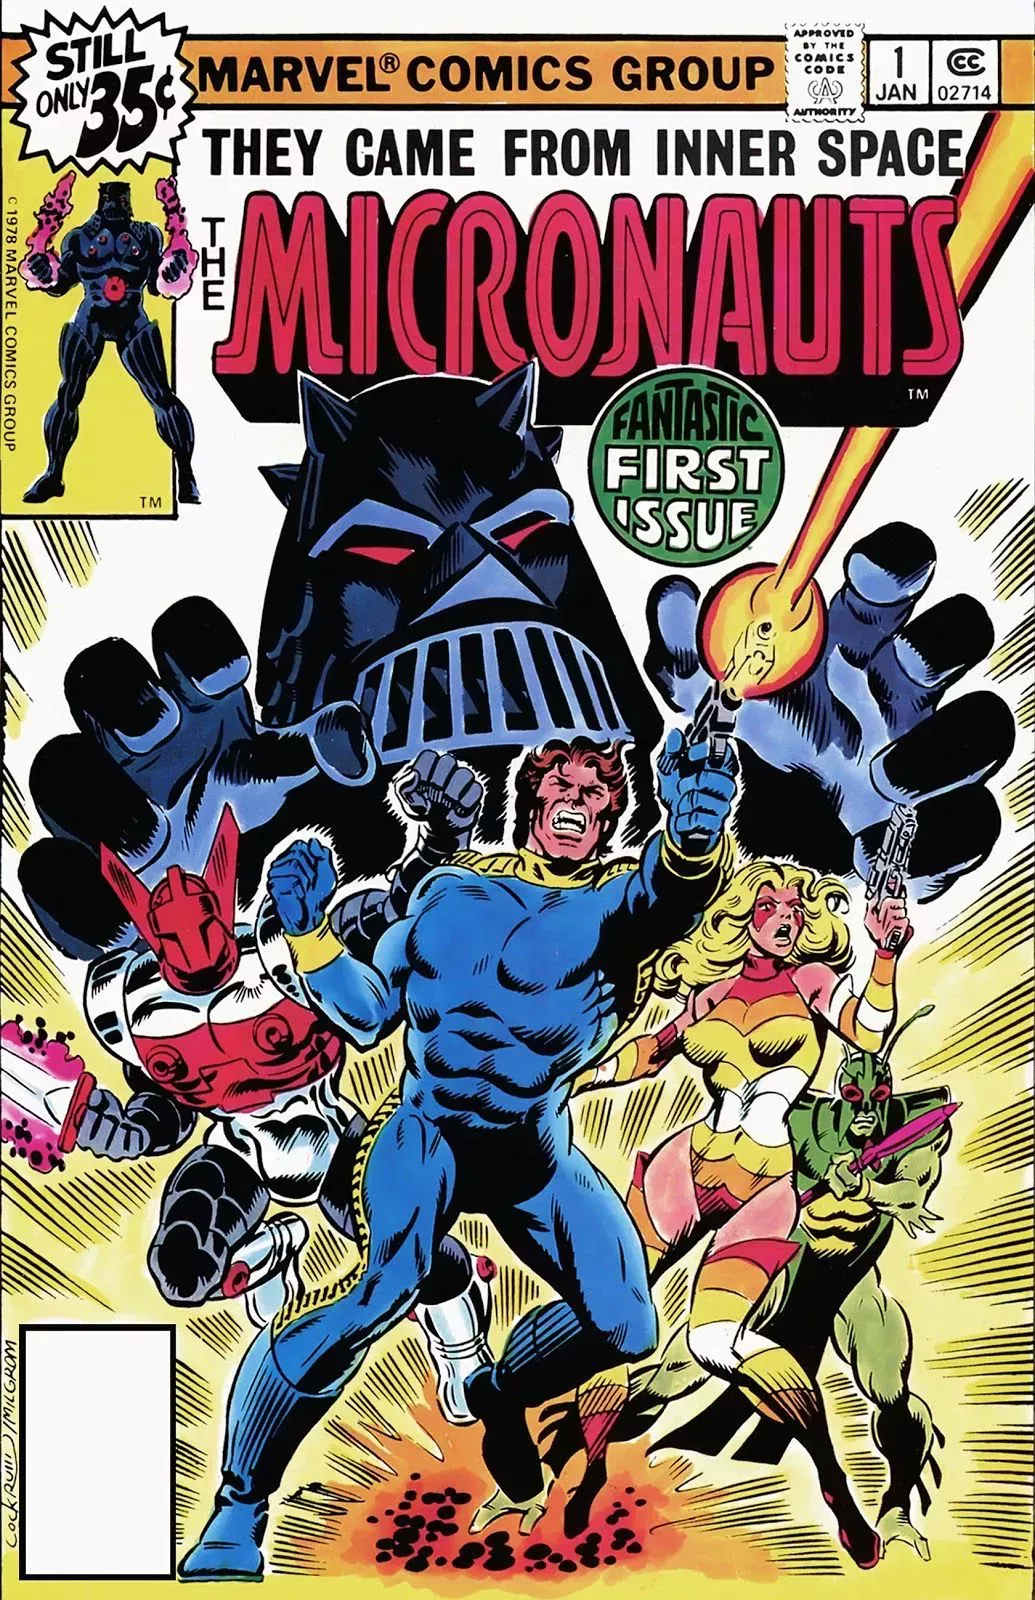 The first issue of the Micronauts